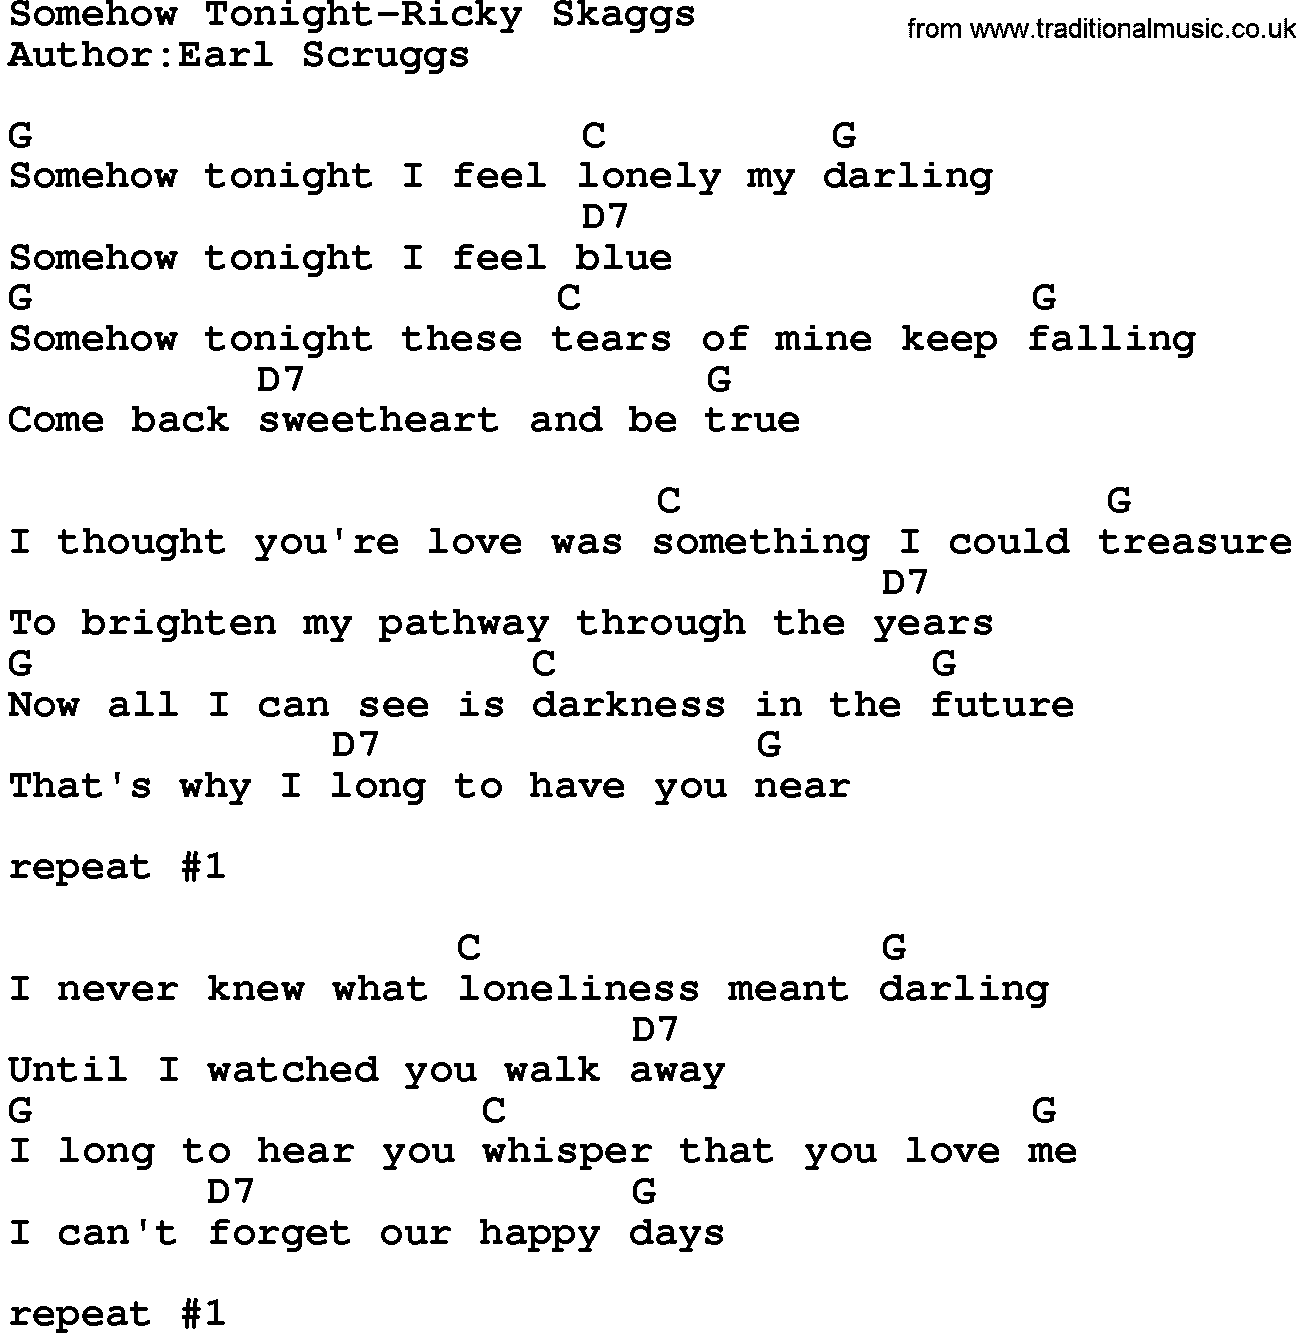 Country music song: Somehow Tonight-Ricky Skaggs lyrics and chords